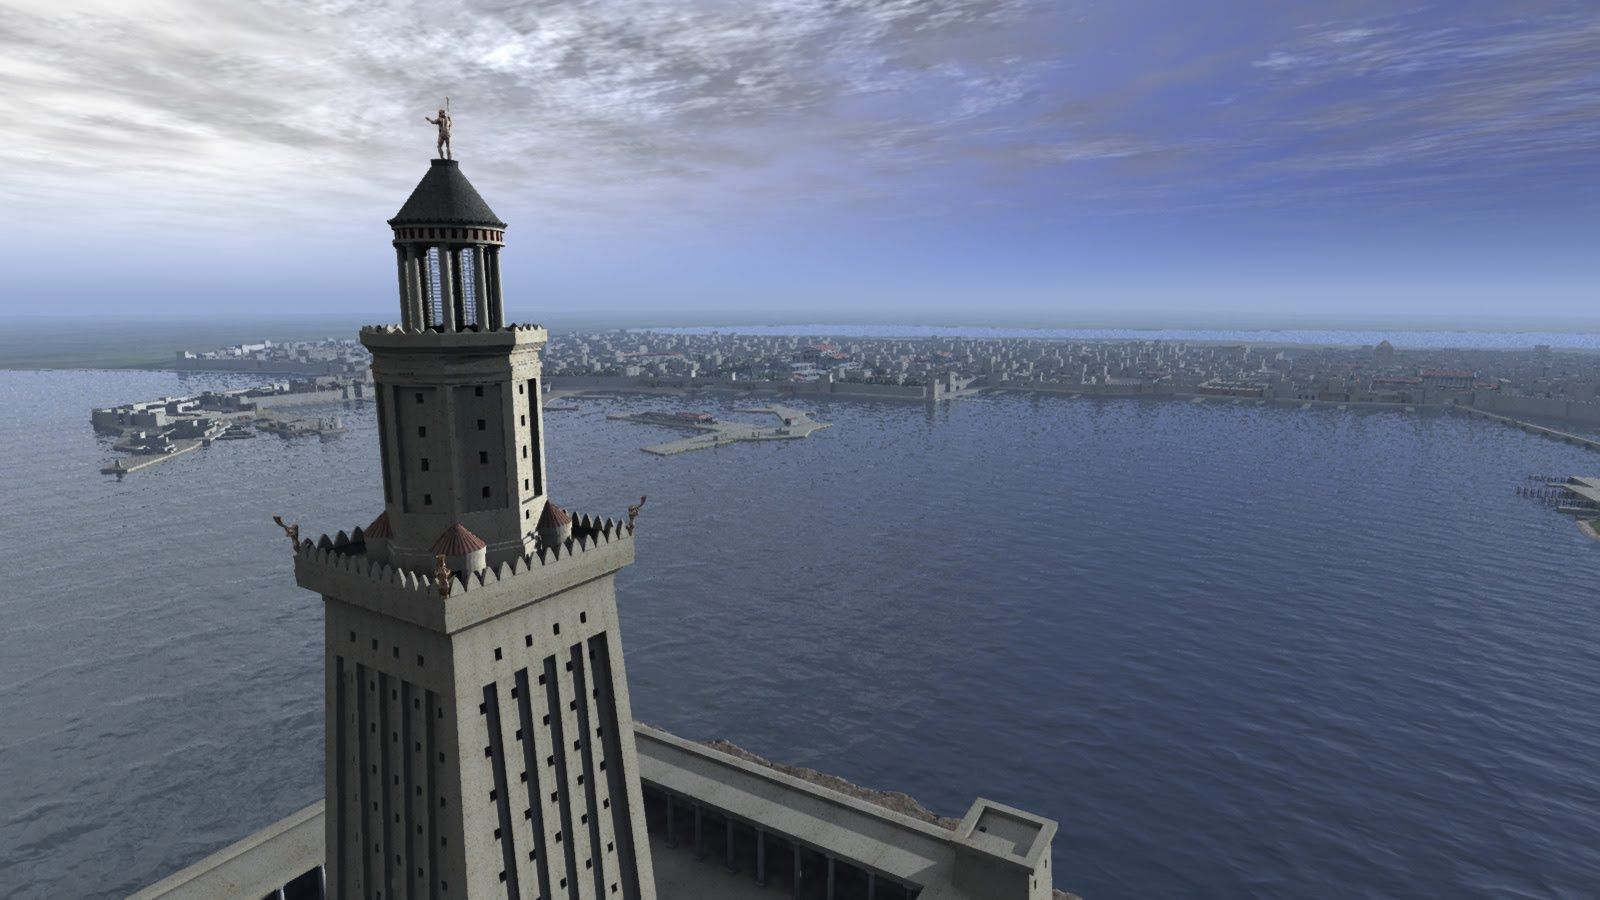 The Lighthouse of Alexandria and the Ancient Port of Alexandria. Alexandria, Alexandria egito, Alexandre o grande